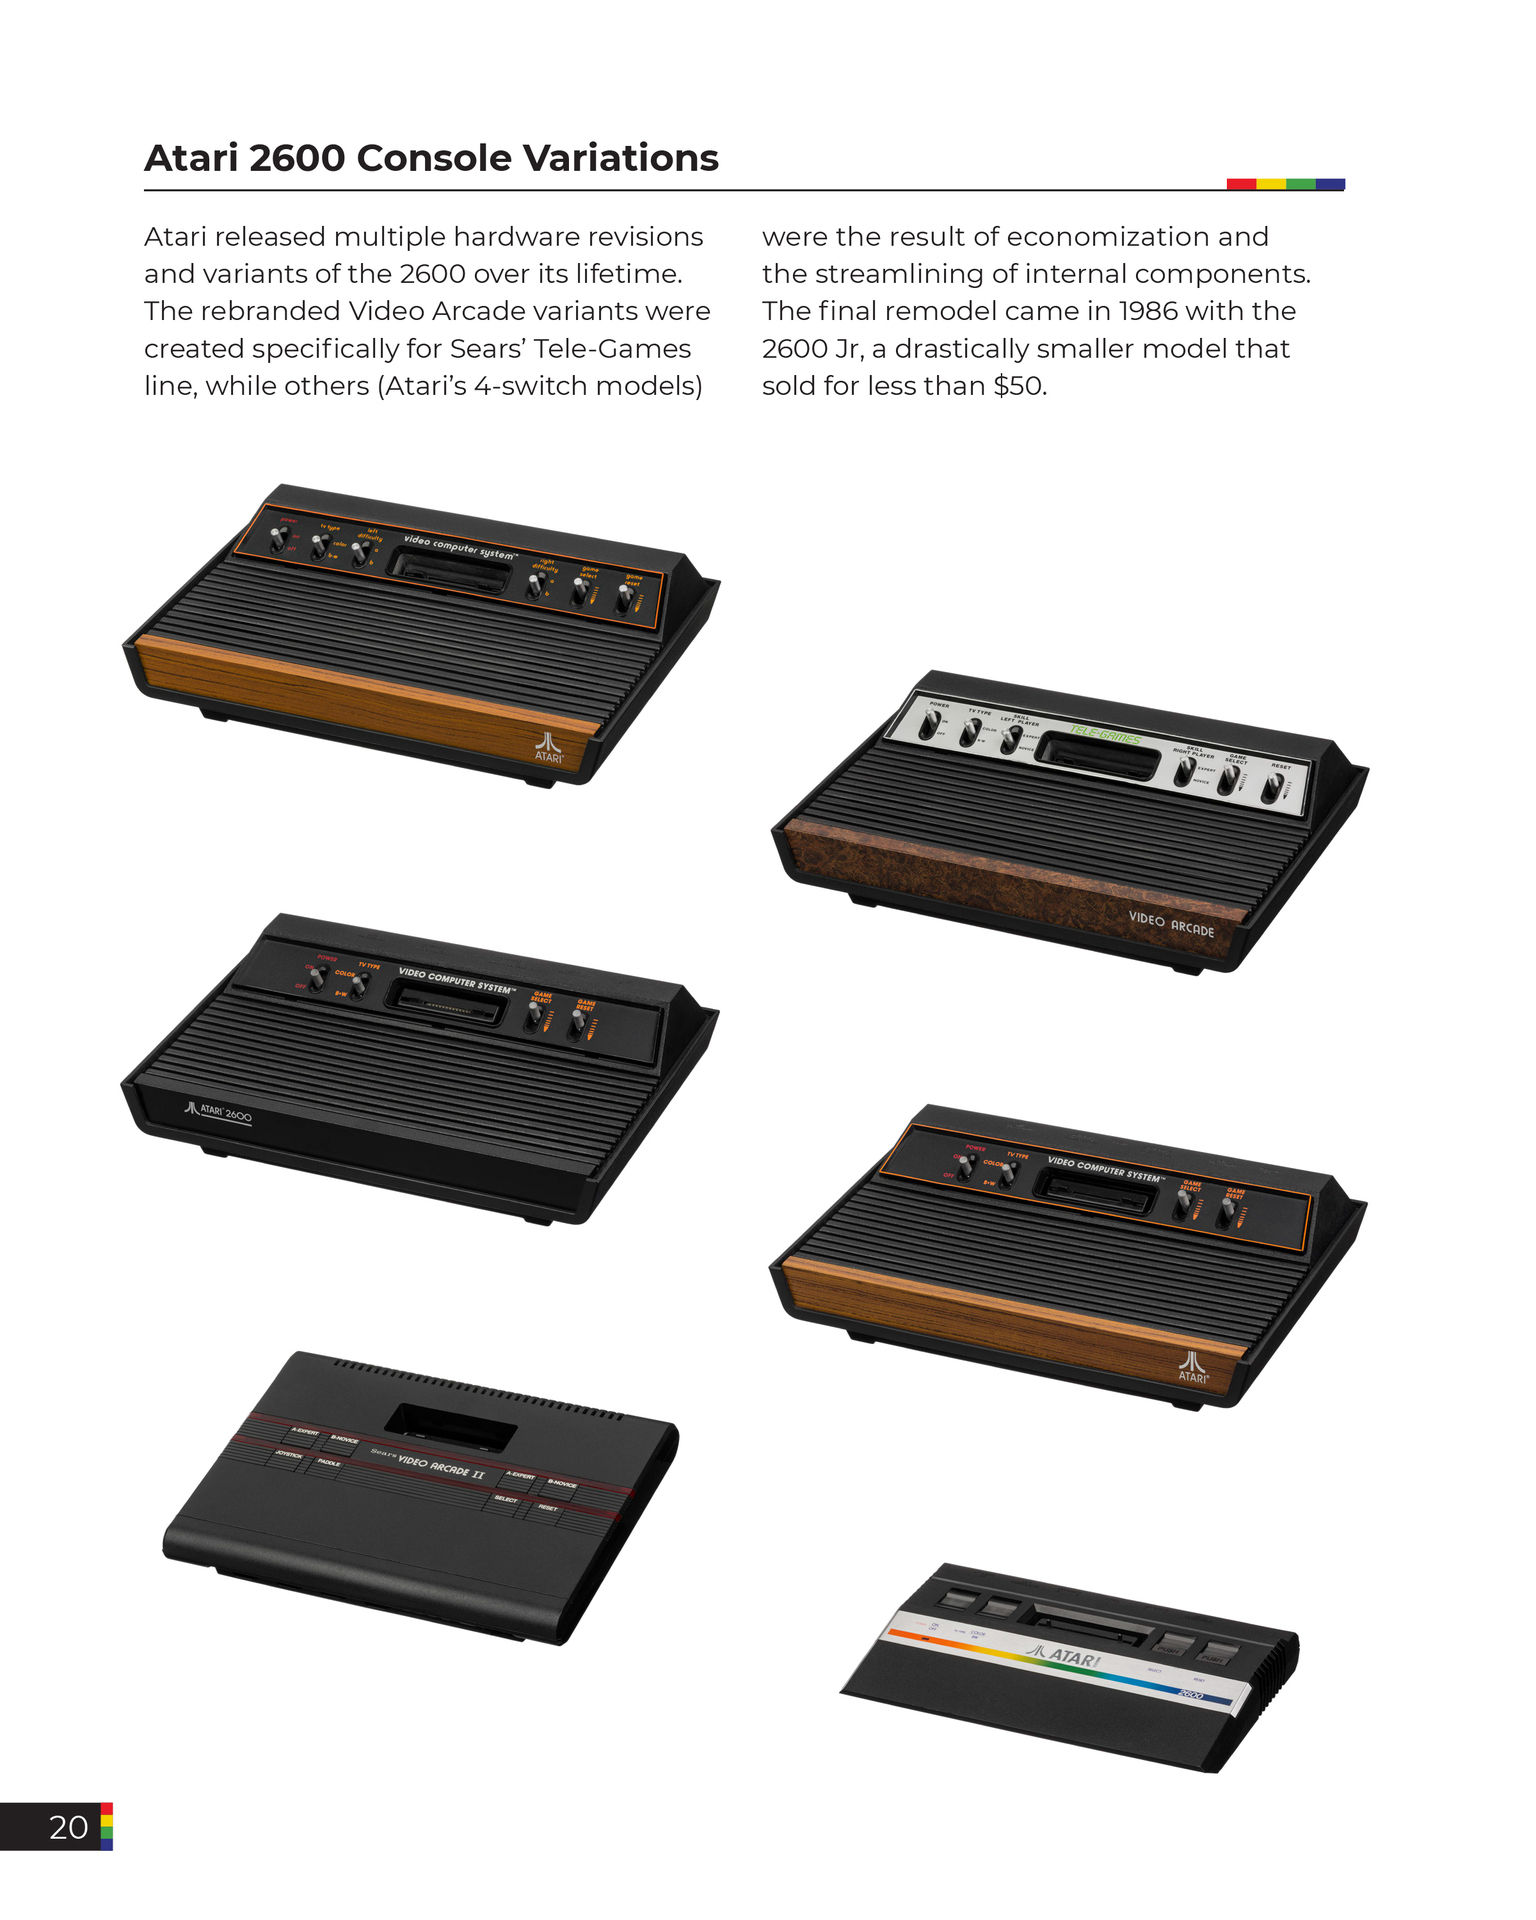 The game console a photographic history from Atari to Xbox - photo 33